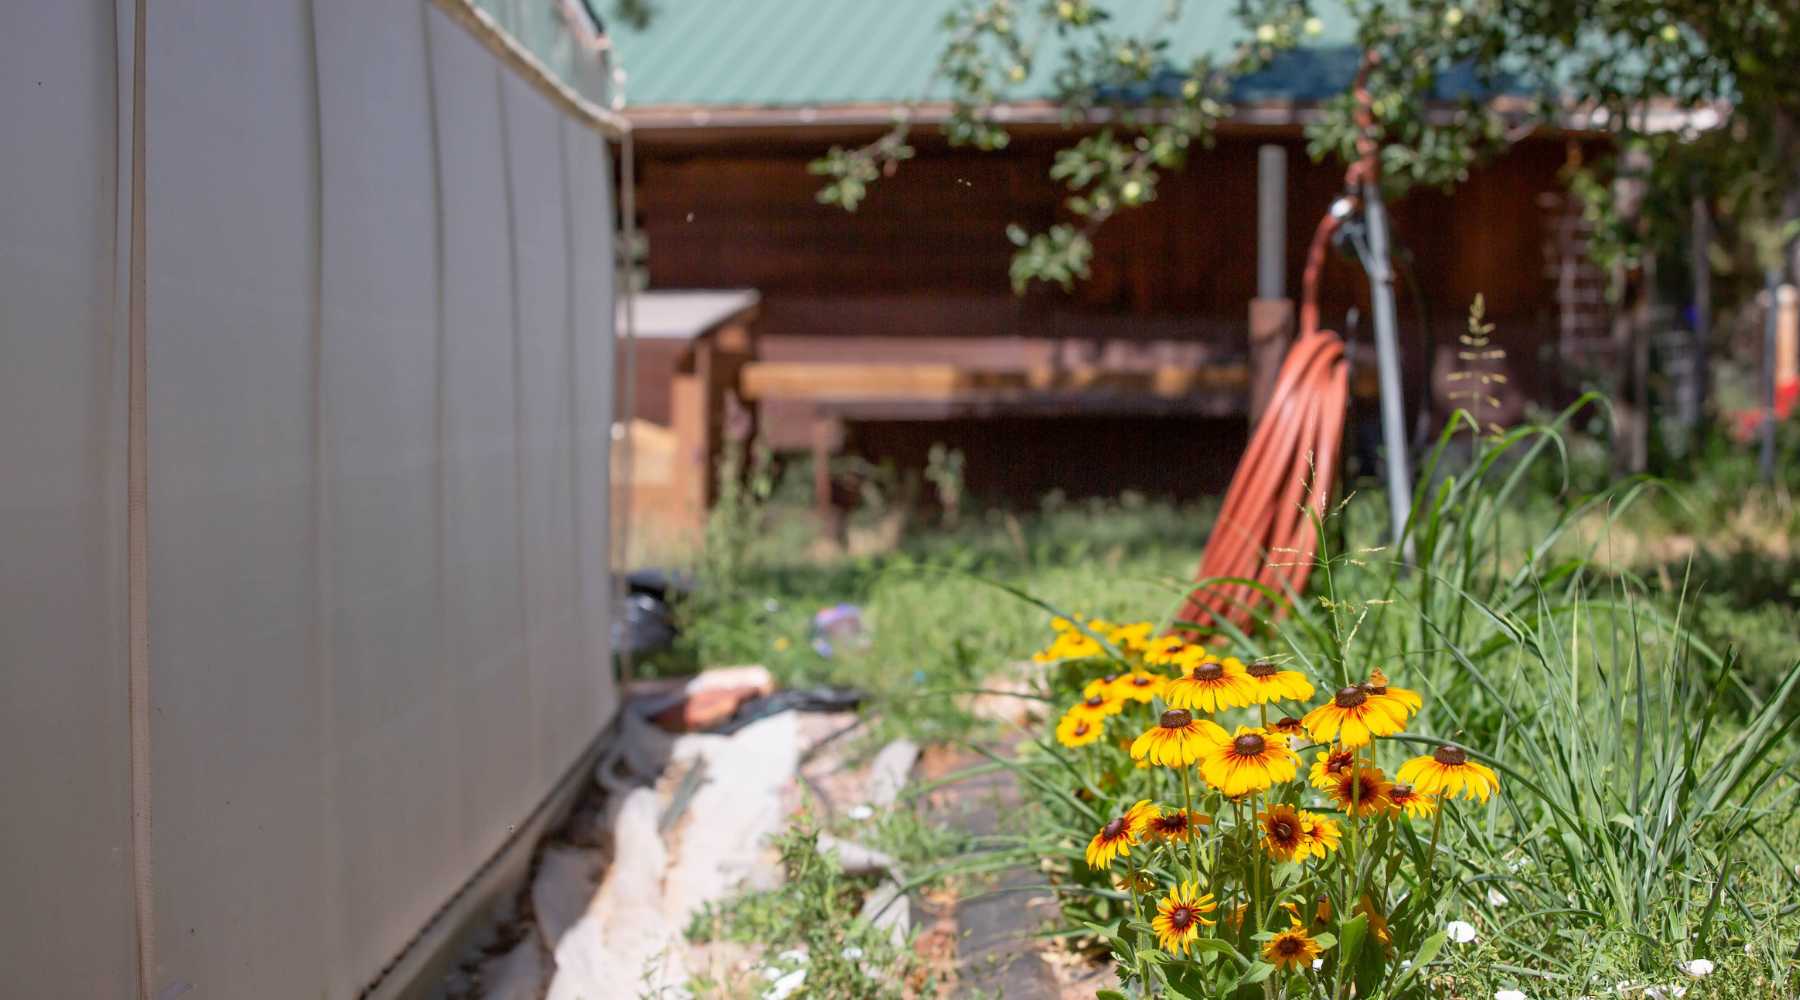 Frost free hydrant installed next to a hoop house with yellow and red flowers visible in the foreground. 